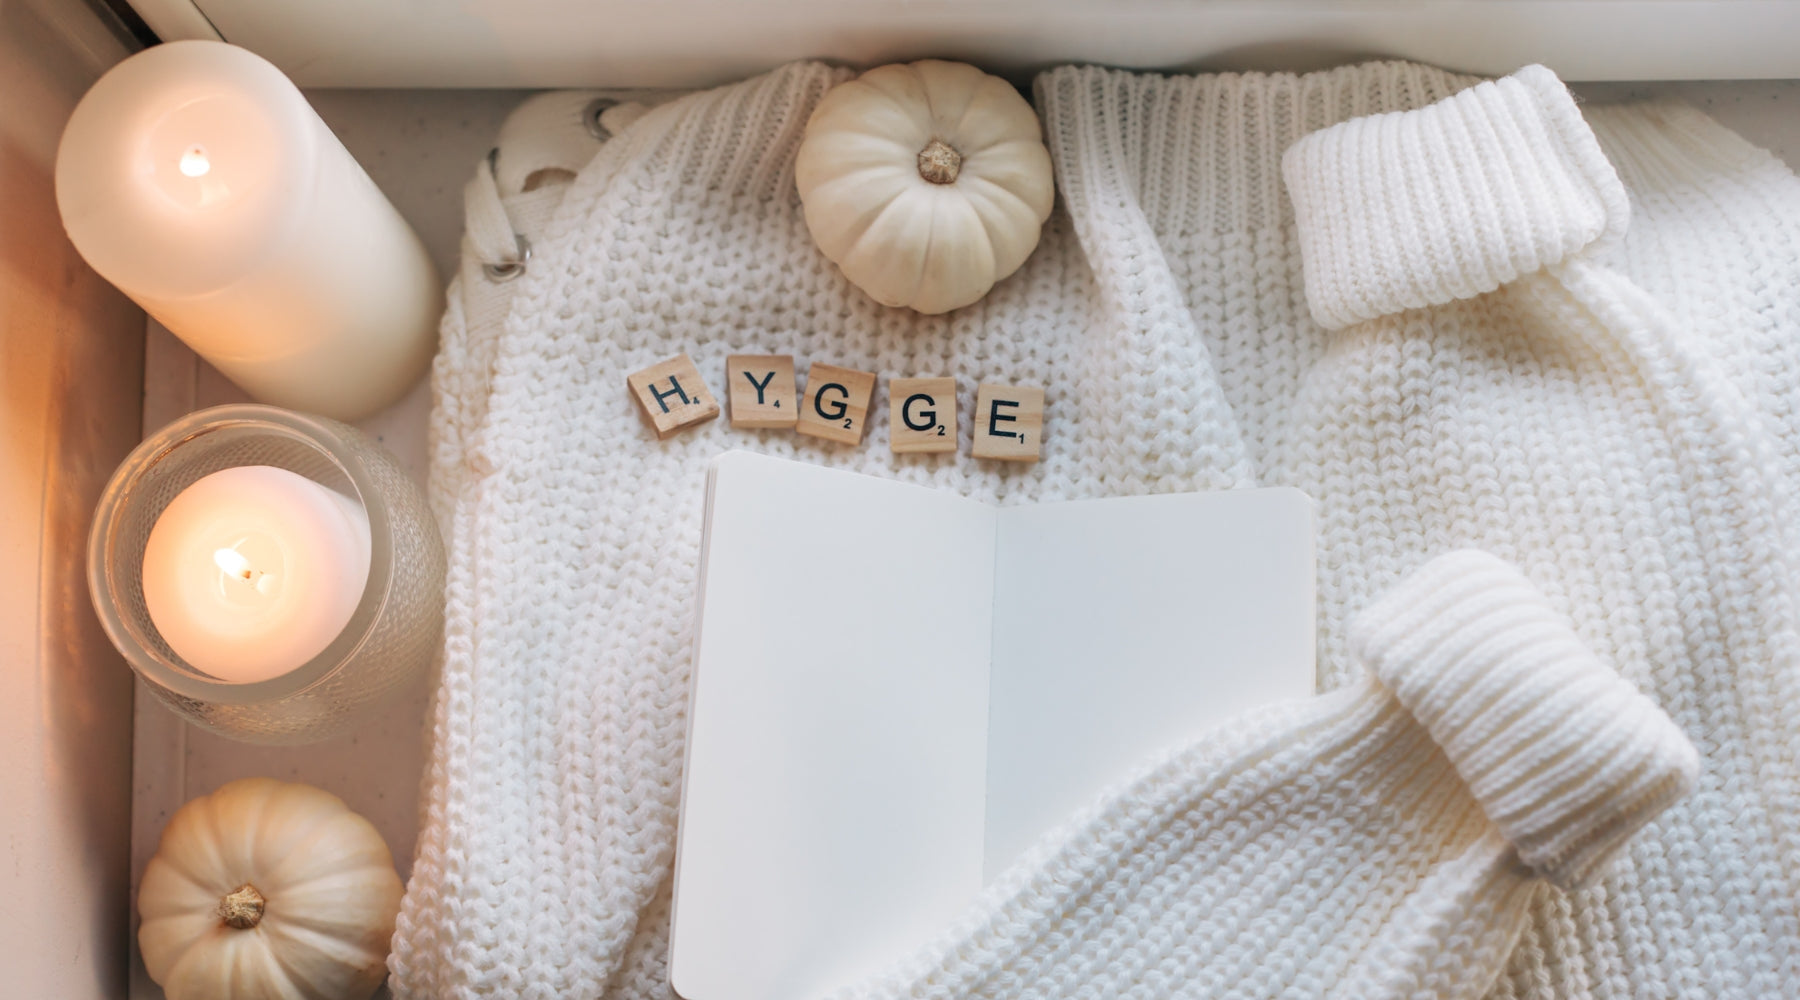 Preparing for Winter with Hygge